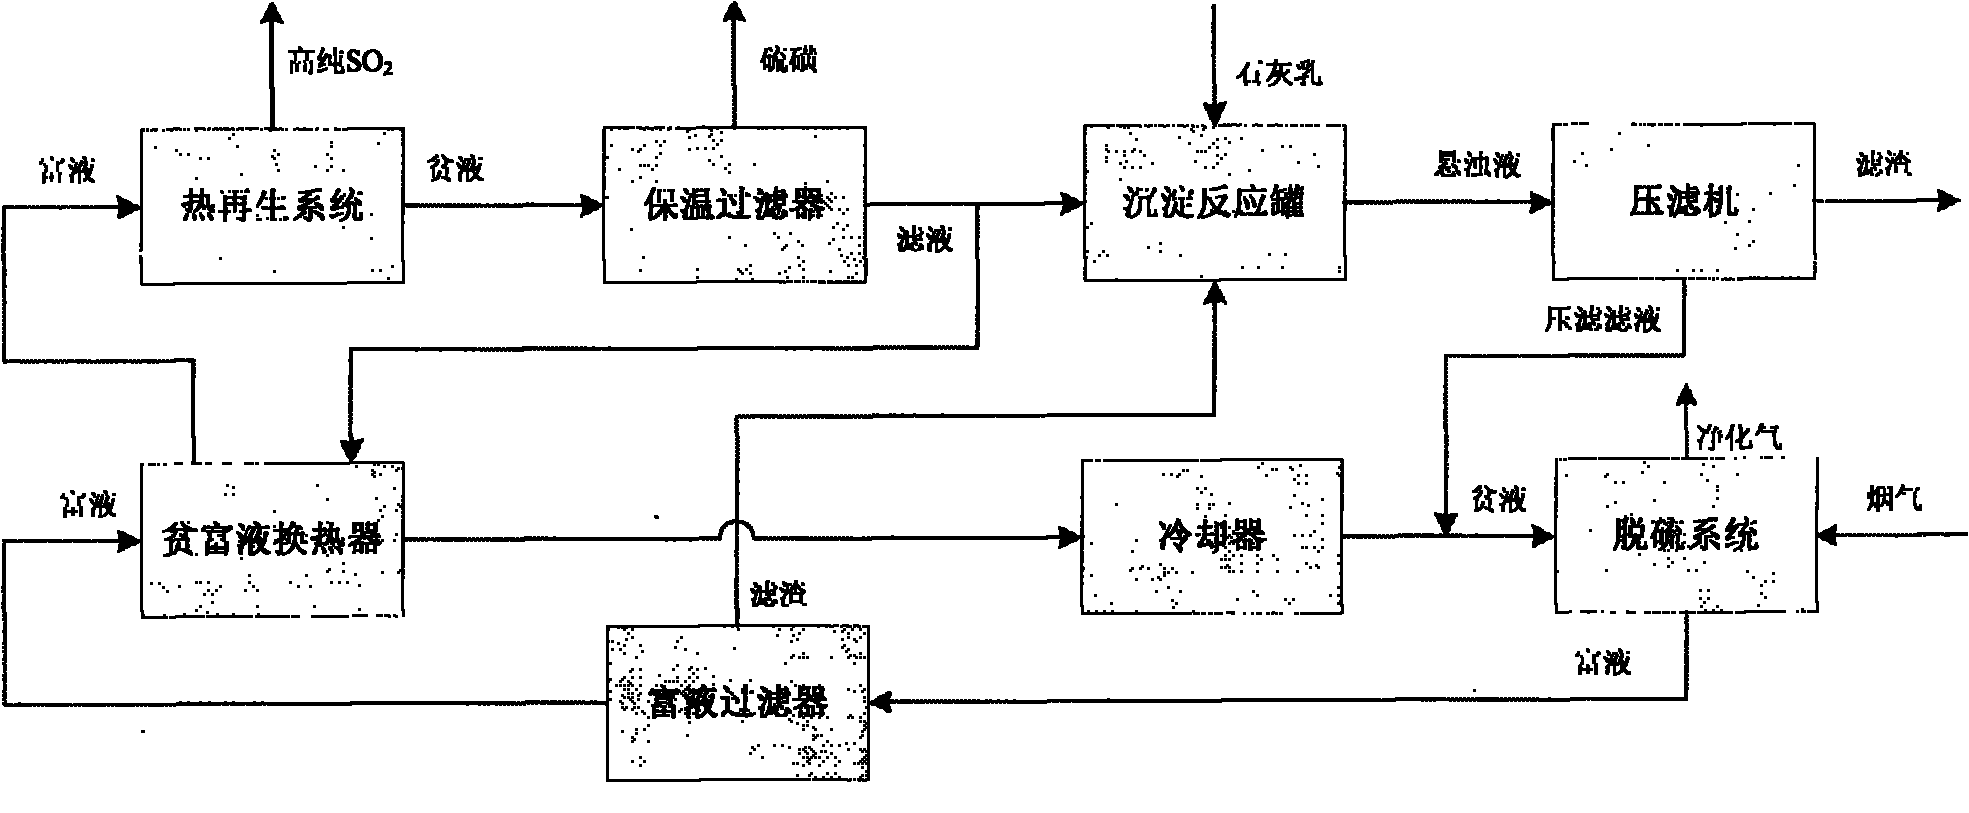 Process for purifying desulfurization solvent in flue gas desulfurization of solvent circulating absorption method